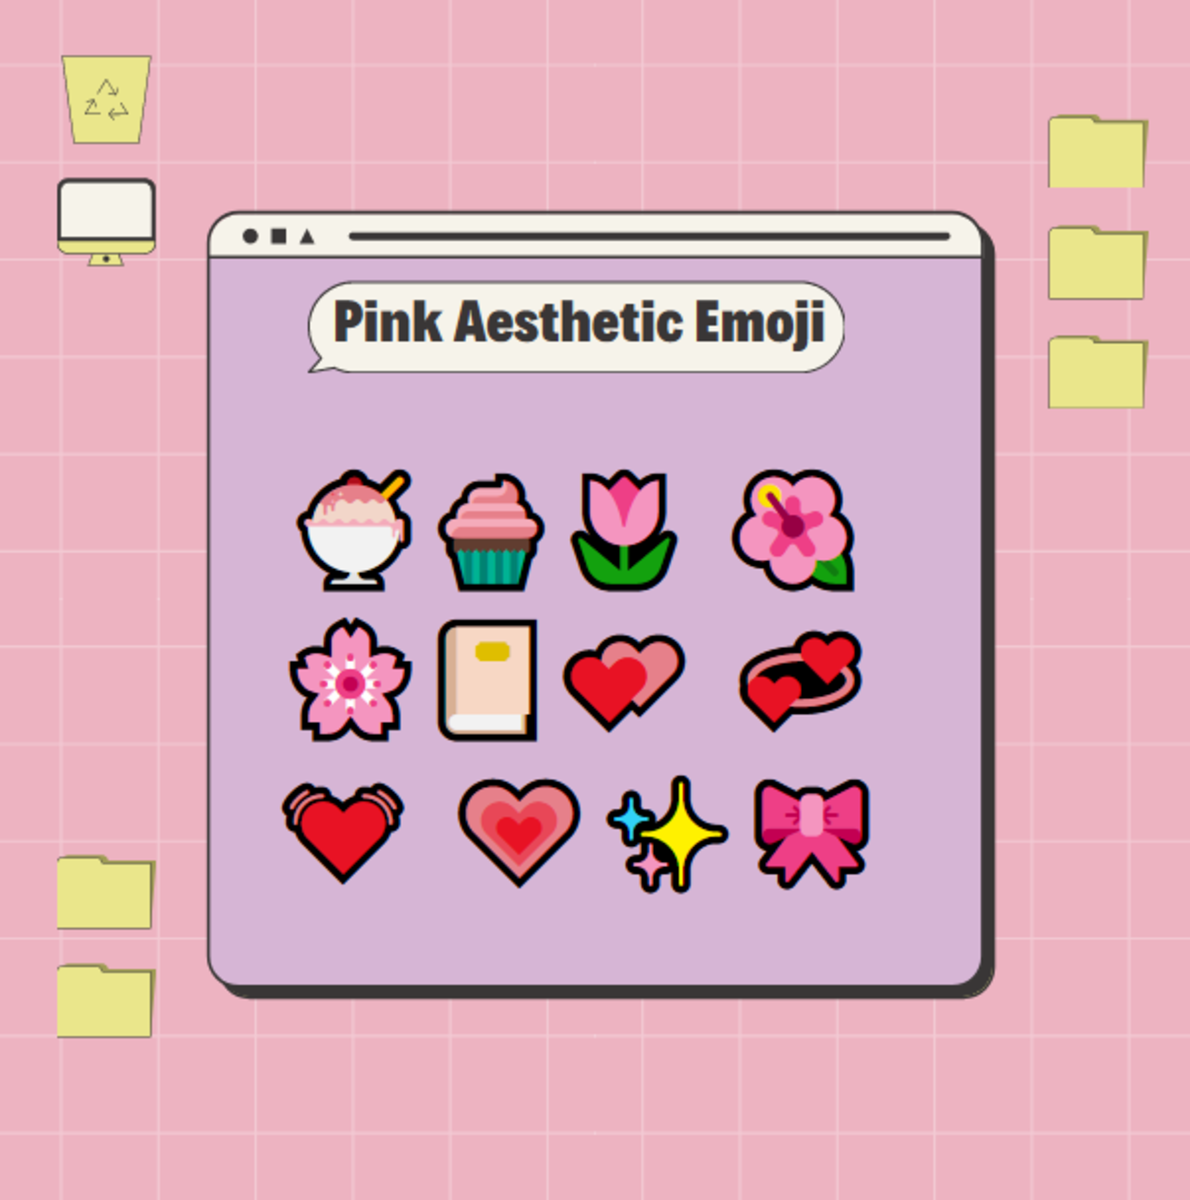 Here are some examples of pink aesthetic emoji!